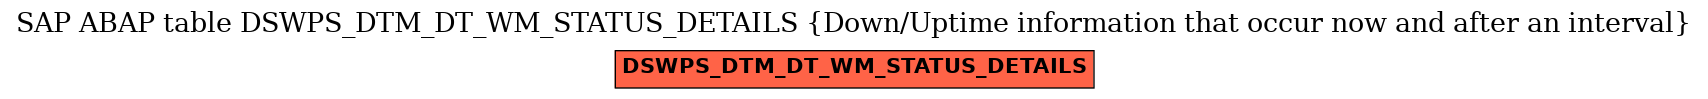 E-R Diagram for table DSWPS_DTM_DT_WM_STATUS_DETAILS (Down/Uptime information that occur now and after an interval)